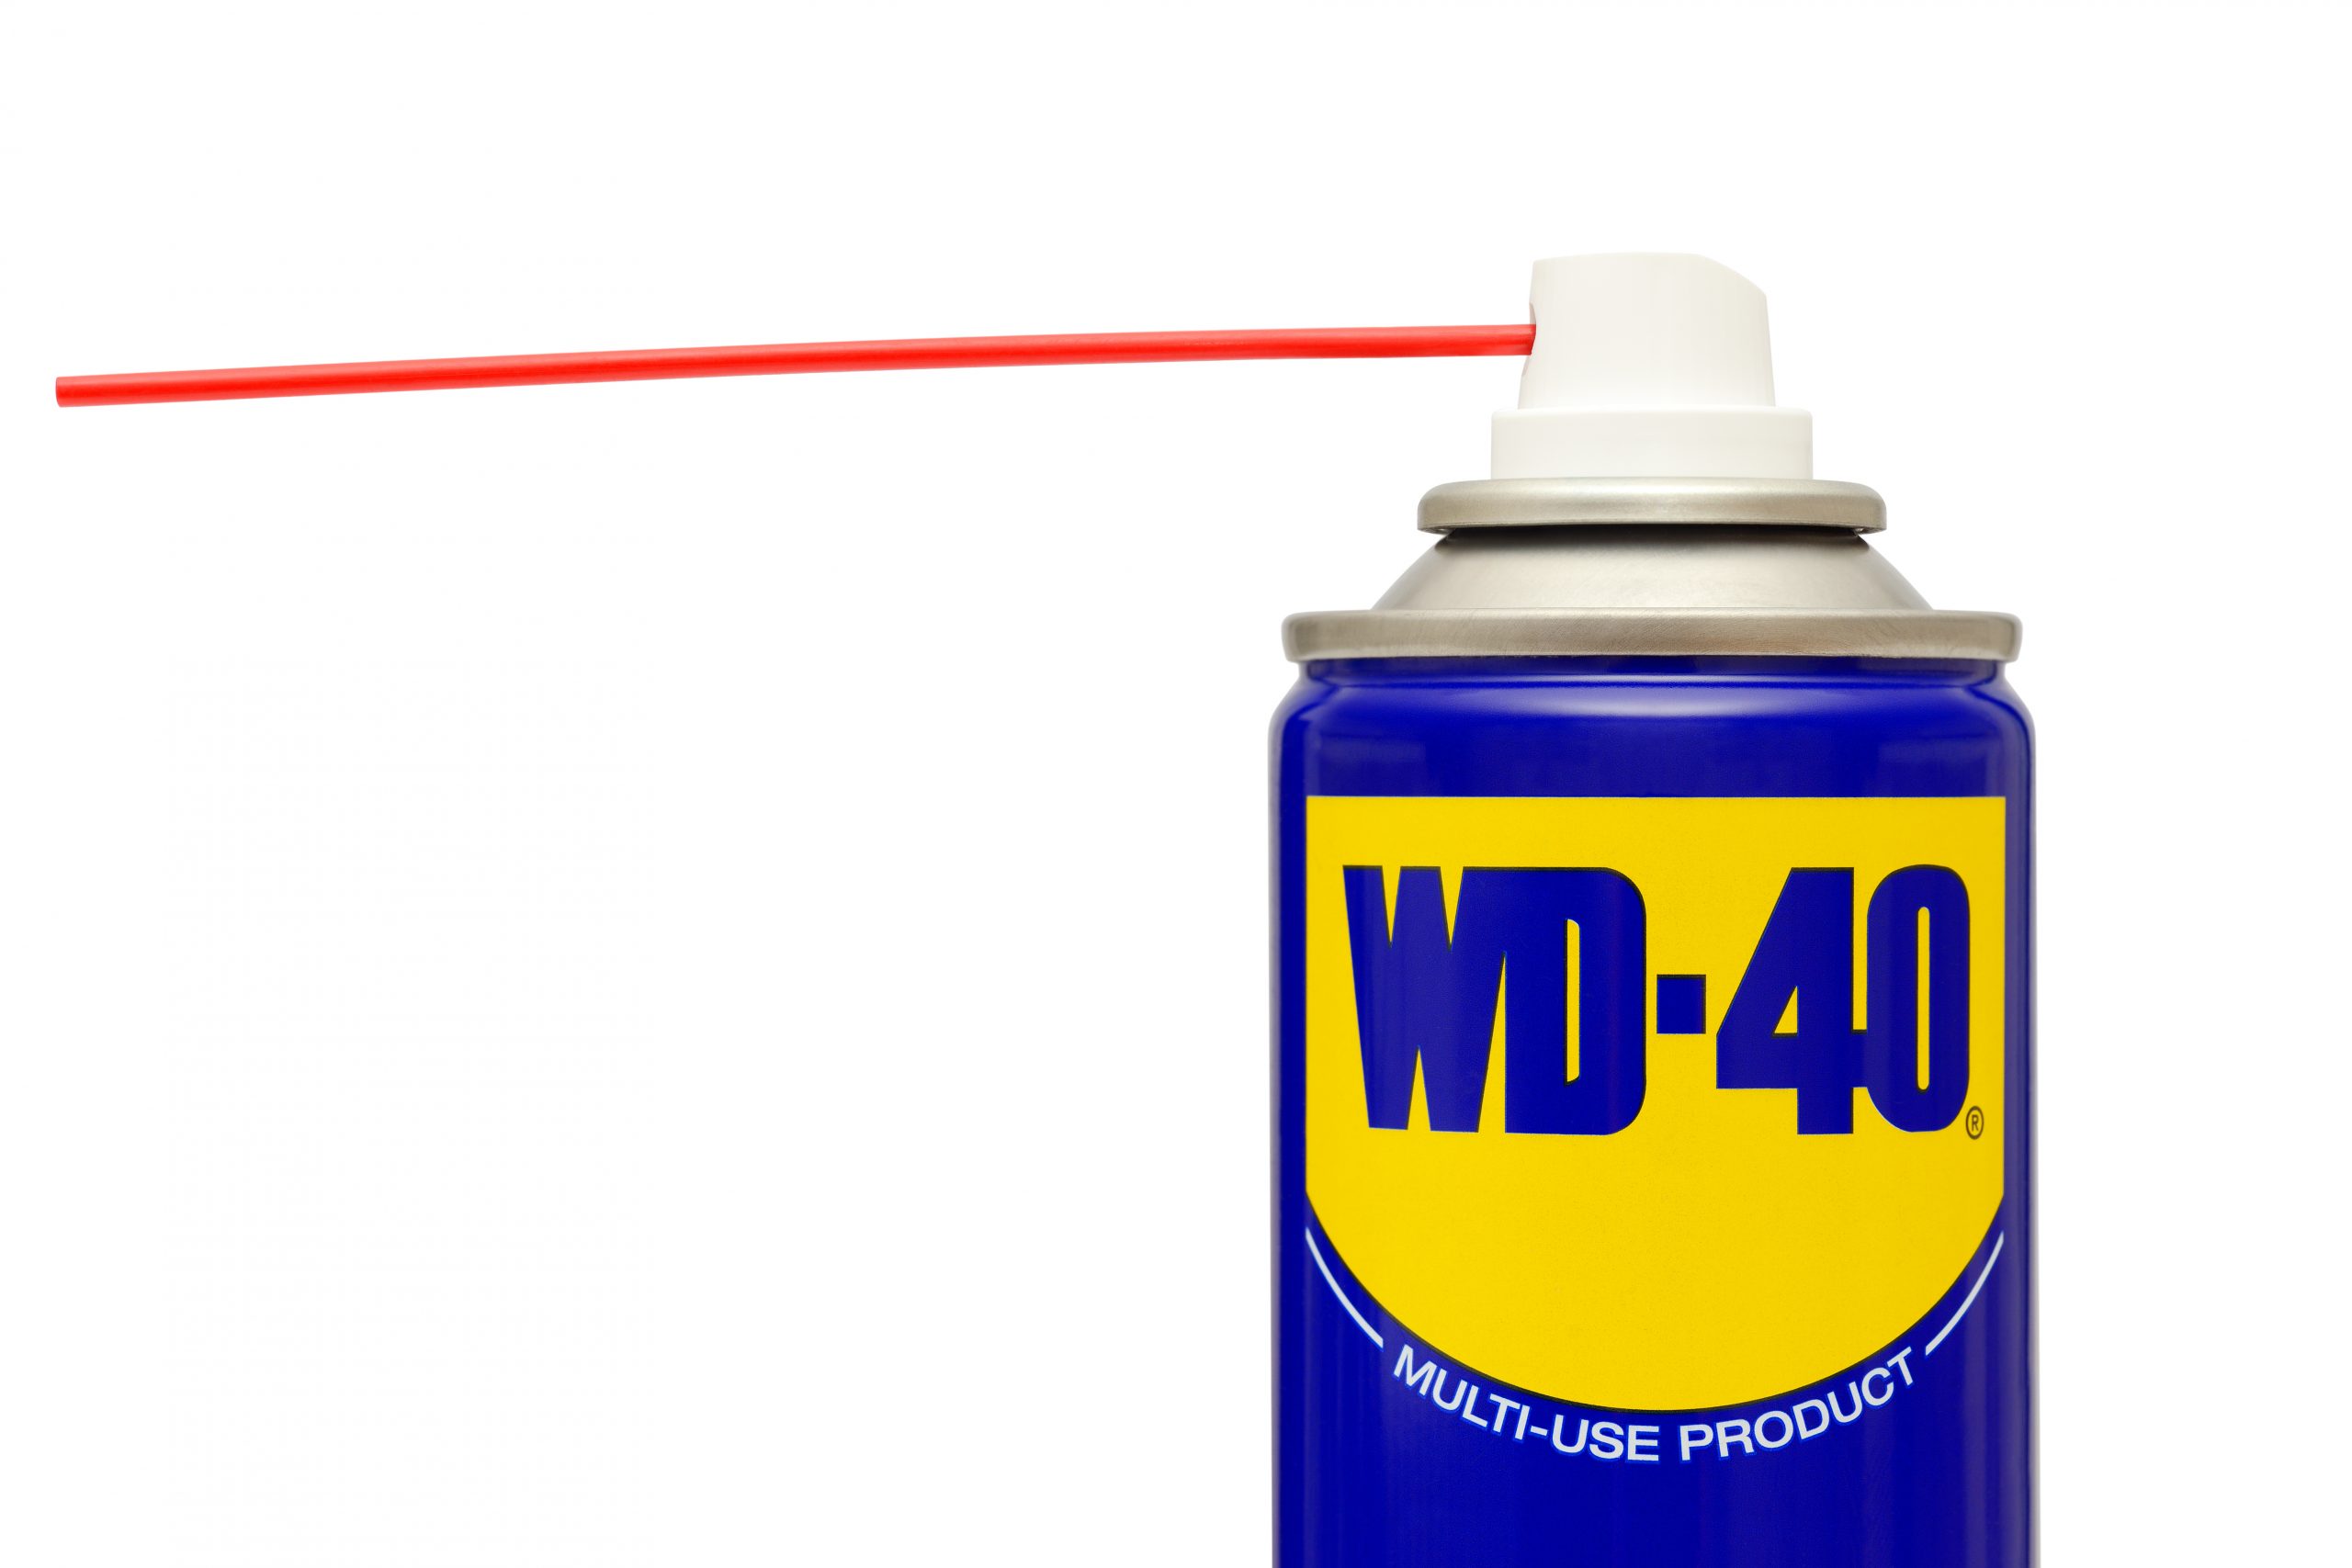 WD-40 has many uses including keeping your seals lubricated, 